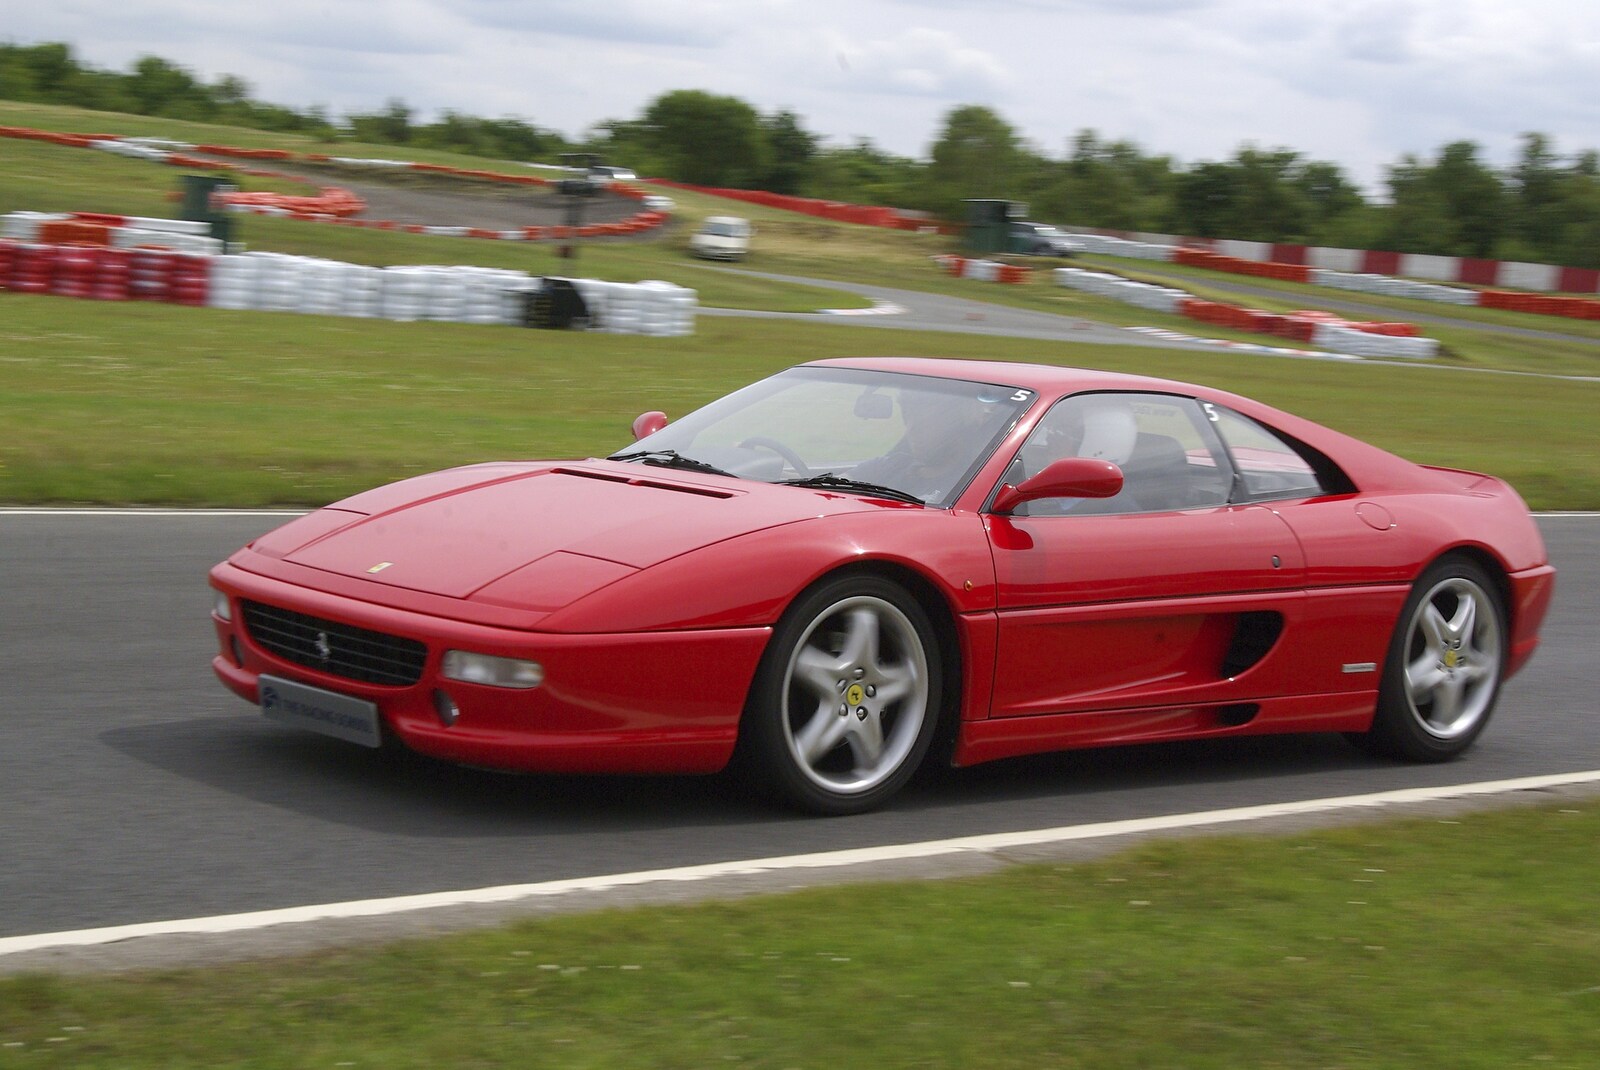 Driving a Racing Car, Three Sisters Racetrack, Wigan, Lancashire - 24th June 2008: Action view of another Ferrari 350 on its way around